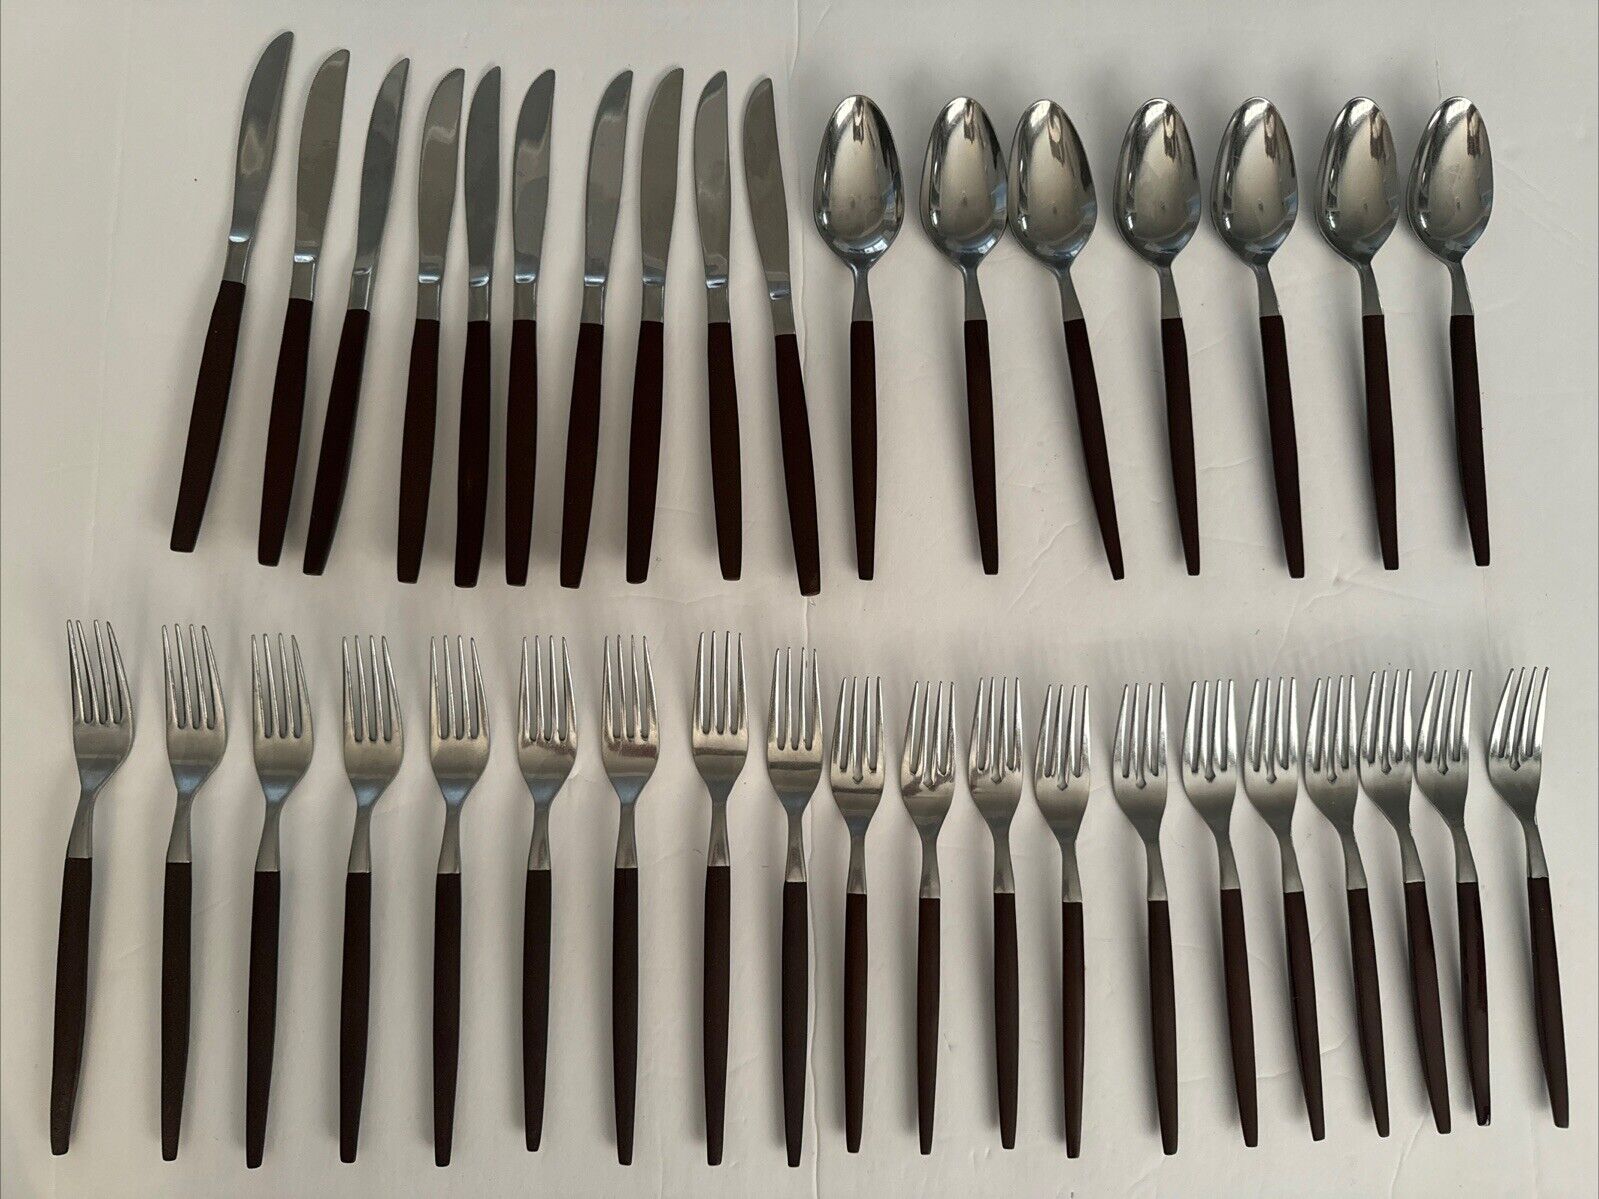 EKCO Eterna Canoe Muffin MCM Japan Forged Stainless Flatware 37 Pieces